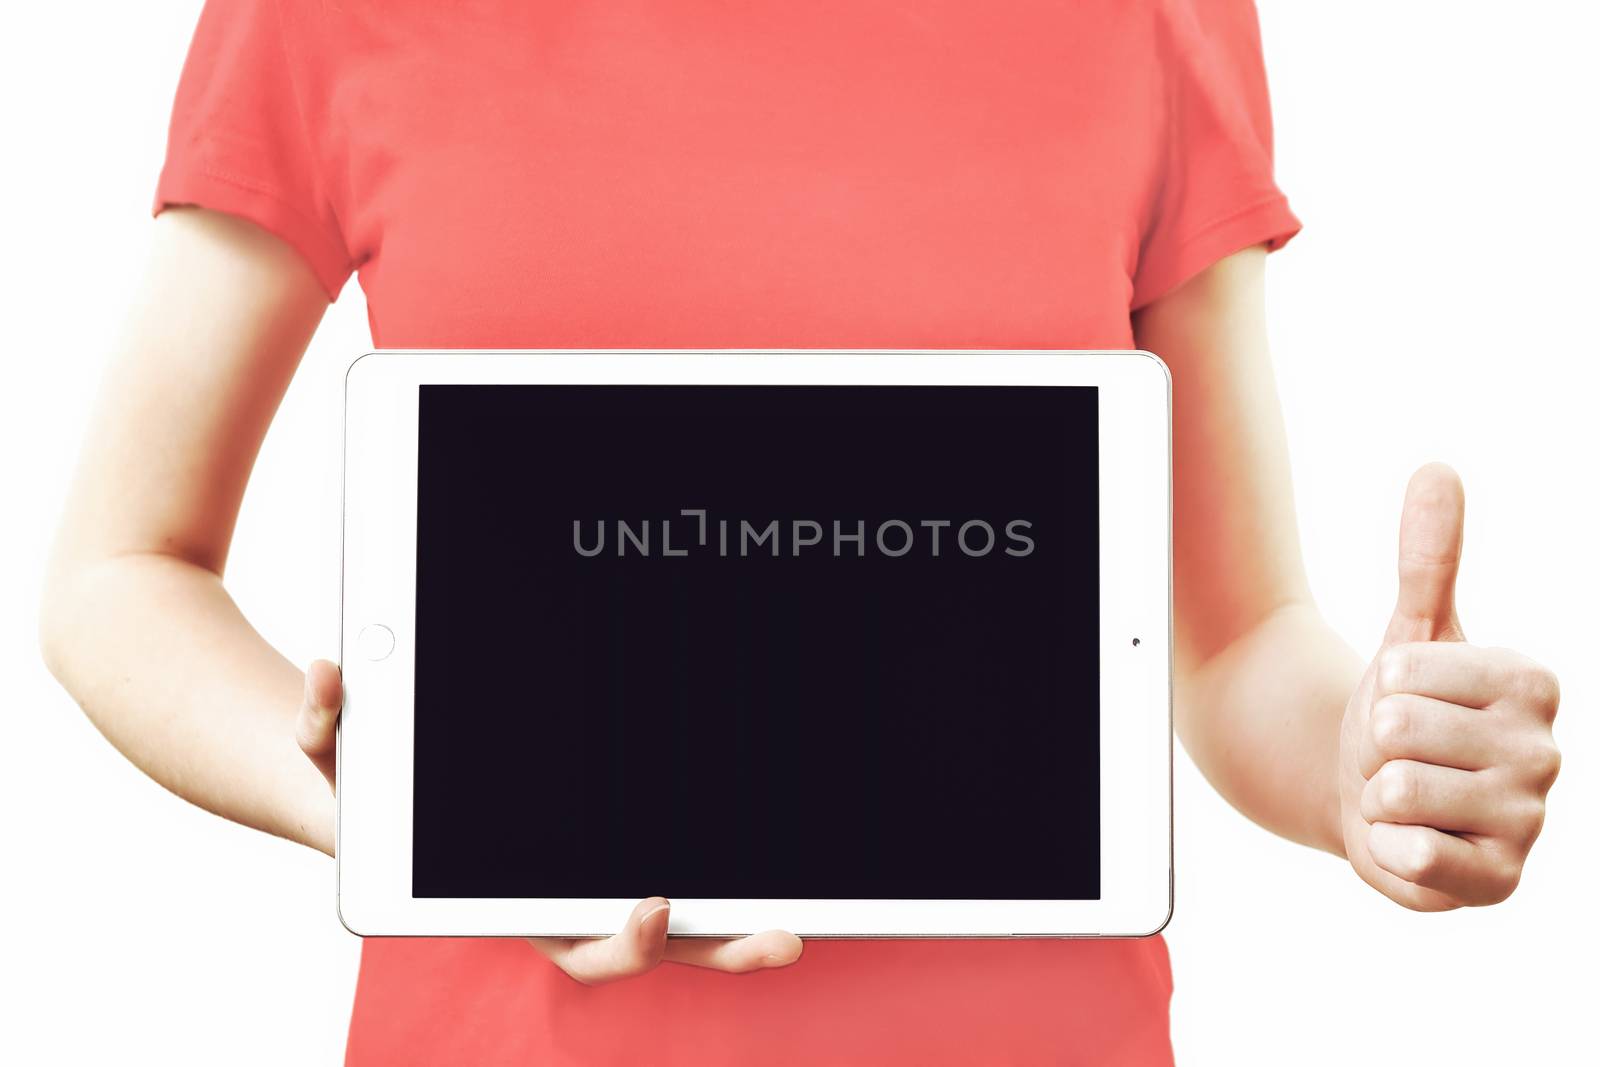 Technology advertising concept image - girl in red t-shirt holding digital tablet with blank screen and showing thumbs up gesture.